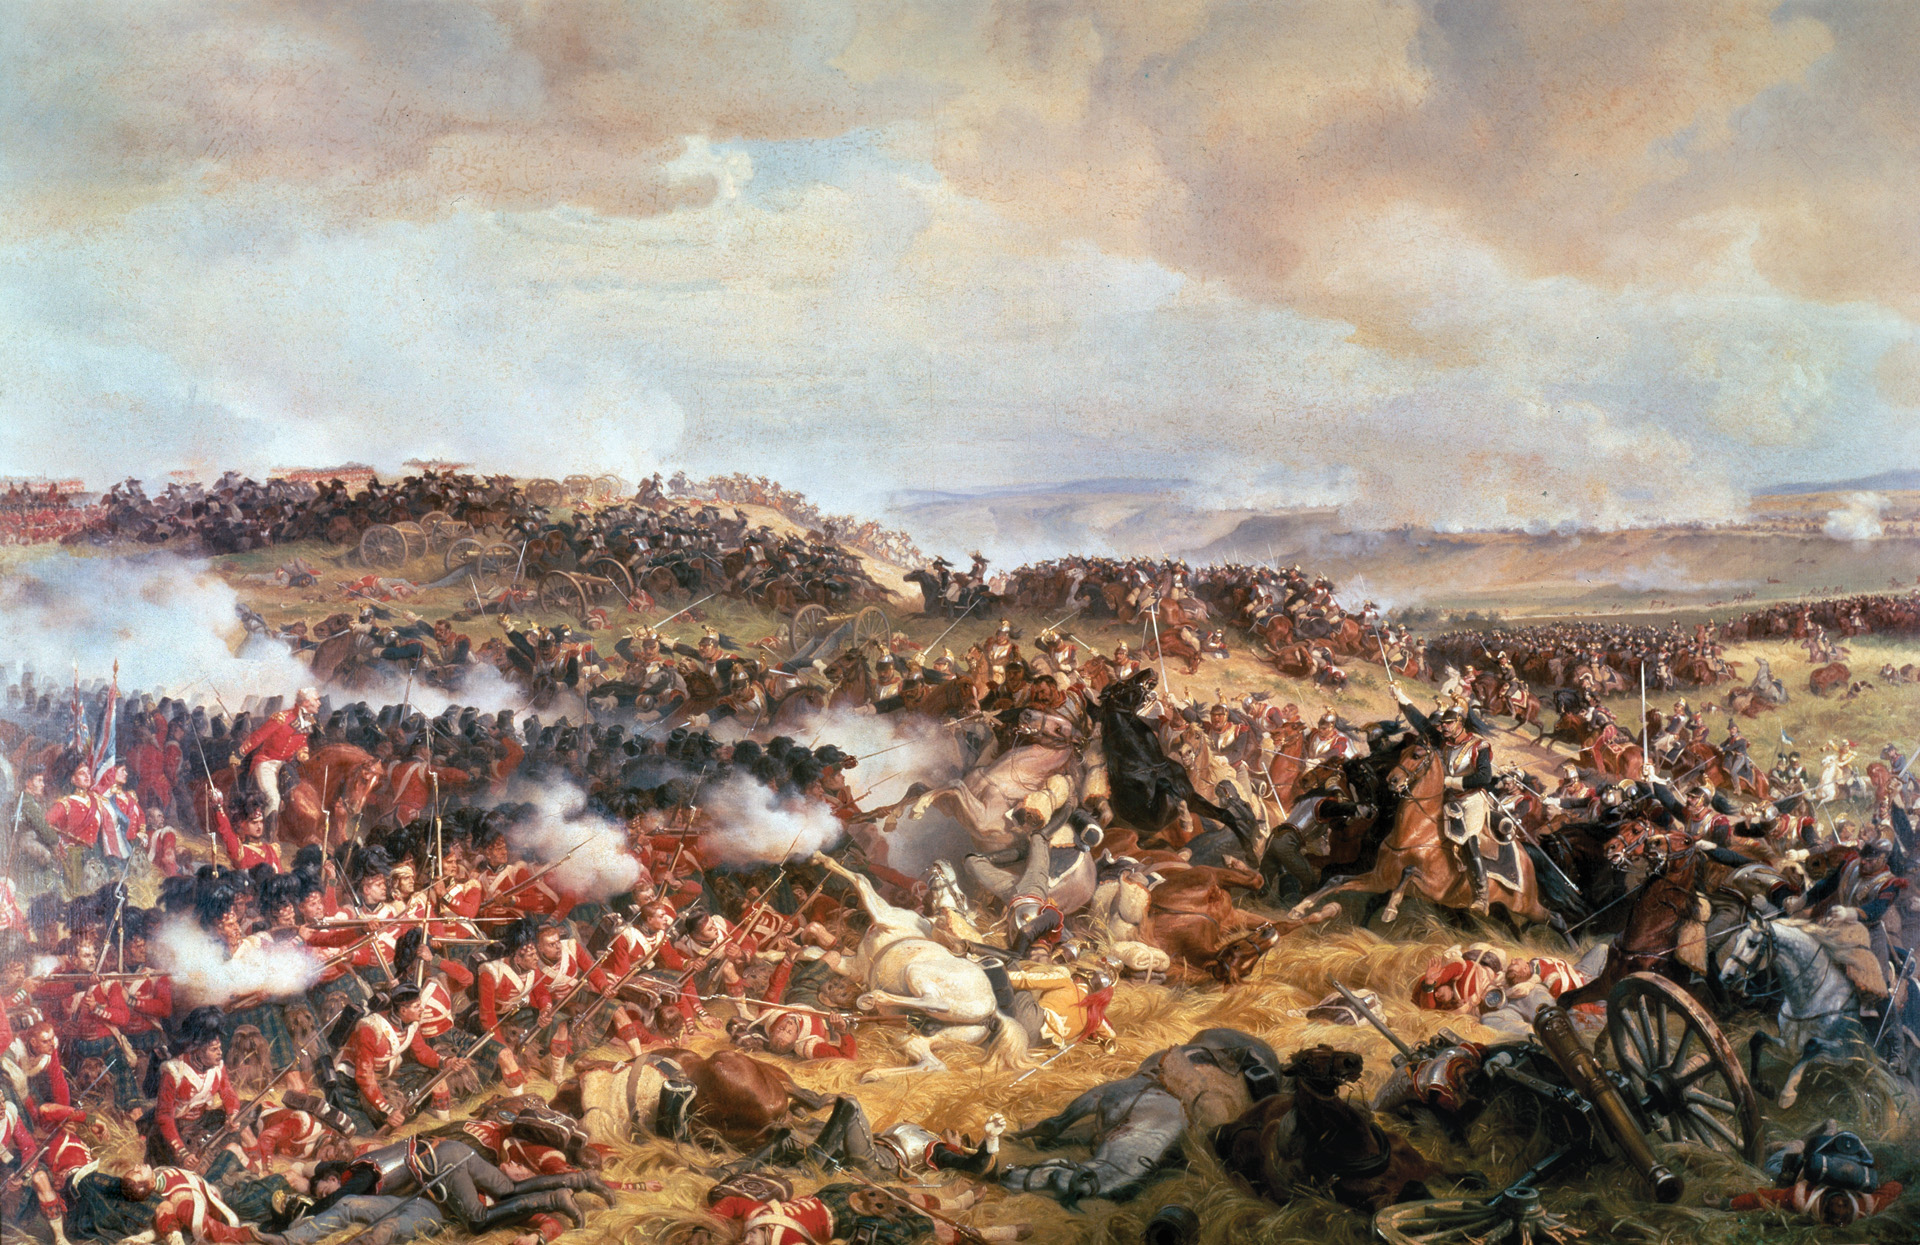 French cuirassiers charge against a British square in a painting by 19th-century artist Felix Philippoteaux that exaggerates the steepness of the hills. Field Marshal Wellington’s artillery pounded the advancing French cavalry, greatly weakening its strength.